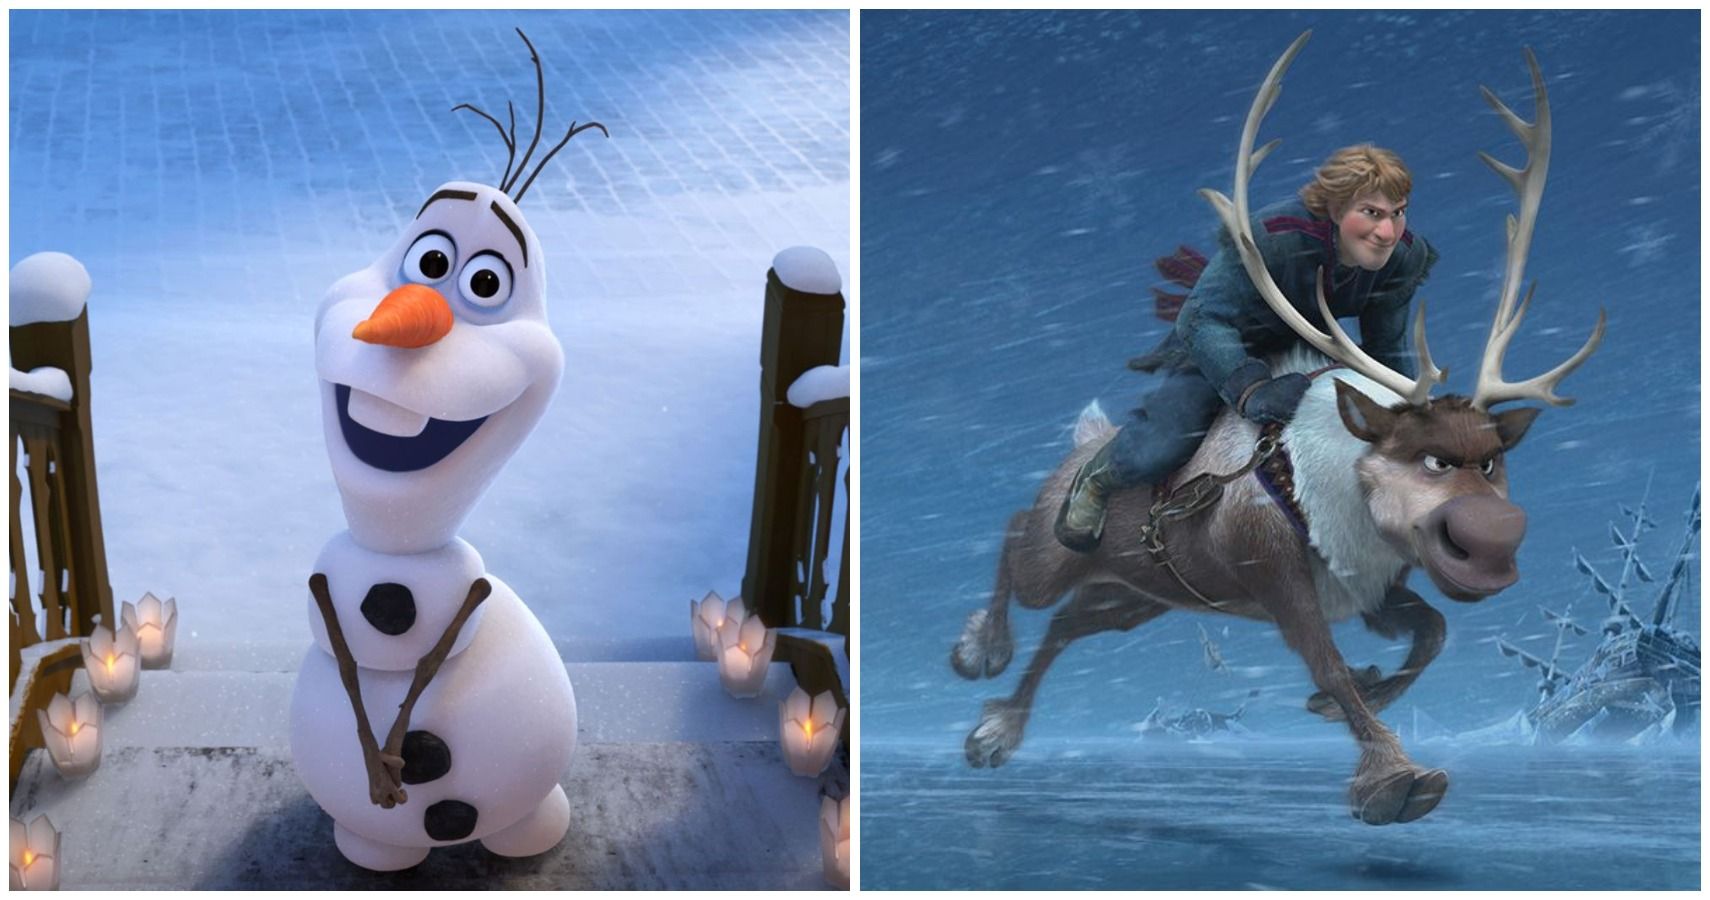 Feature Image 'Frozen' Sven and Olaf